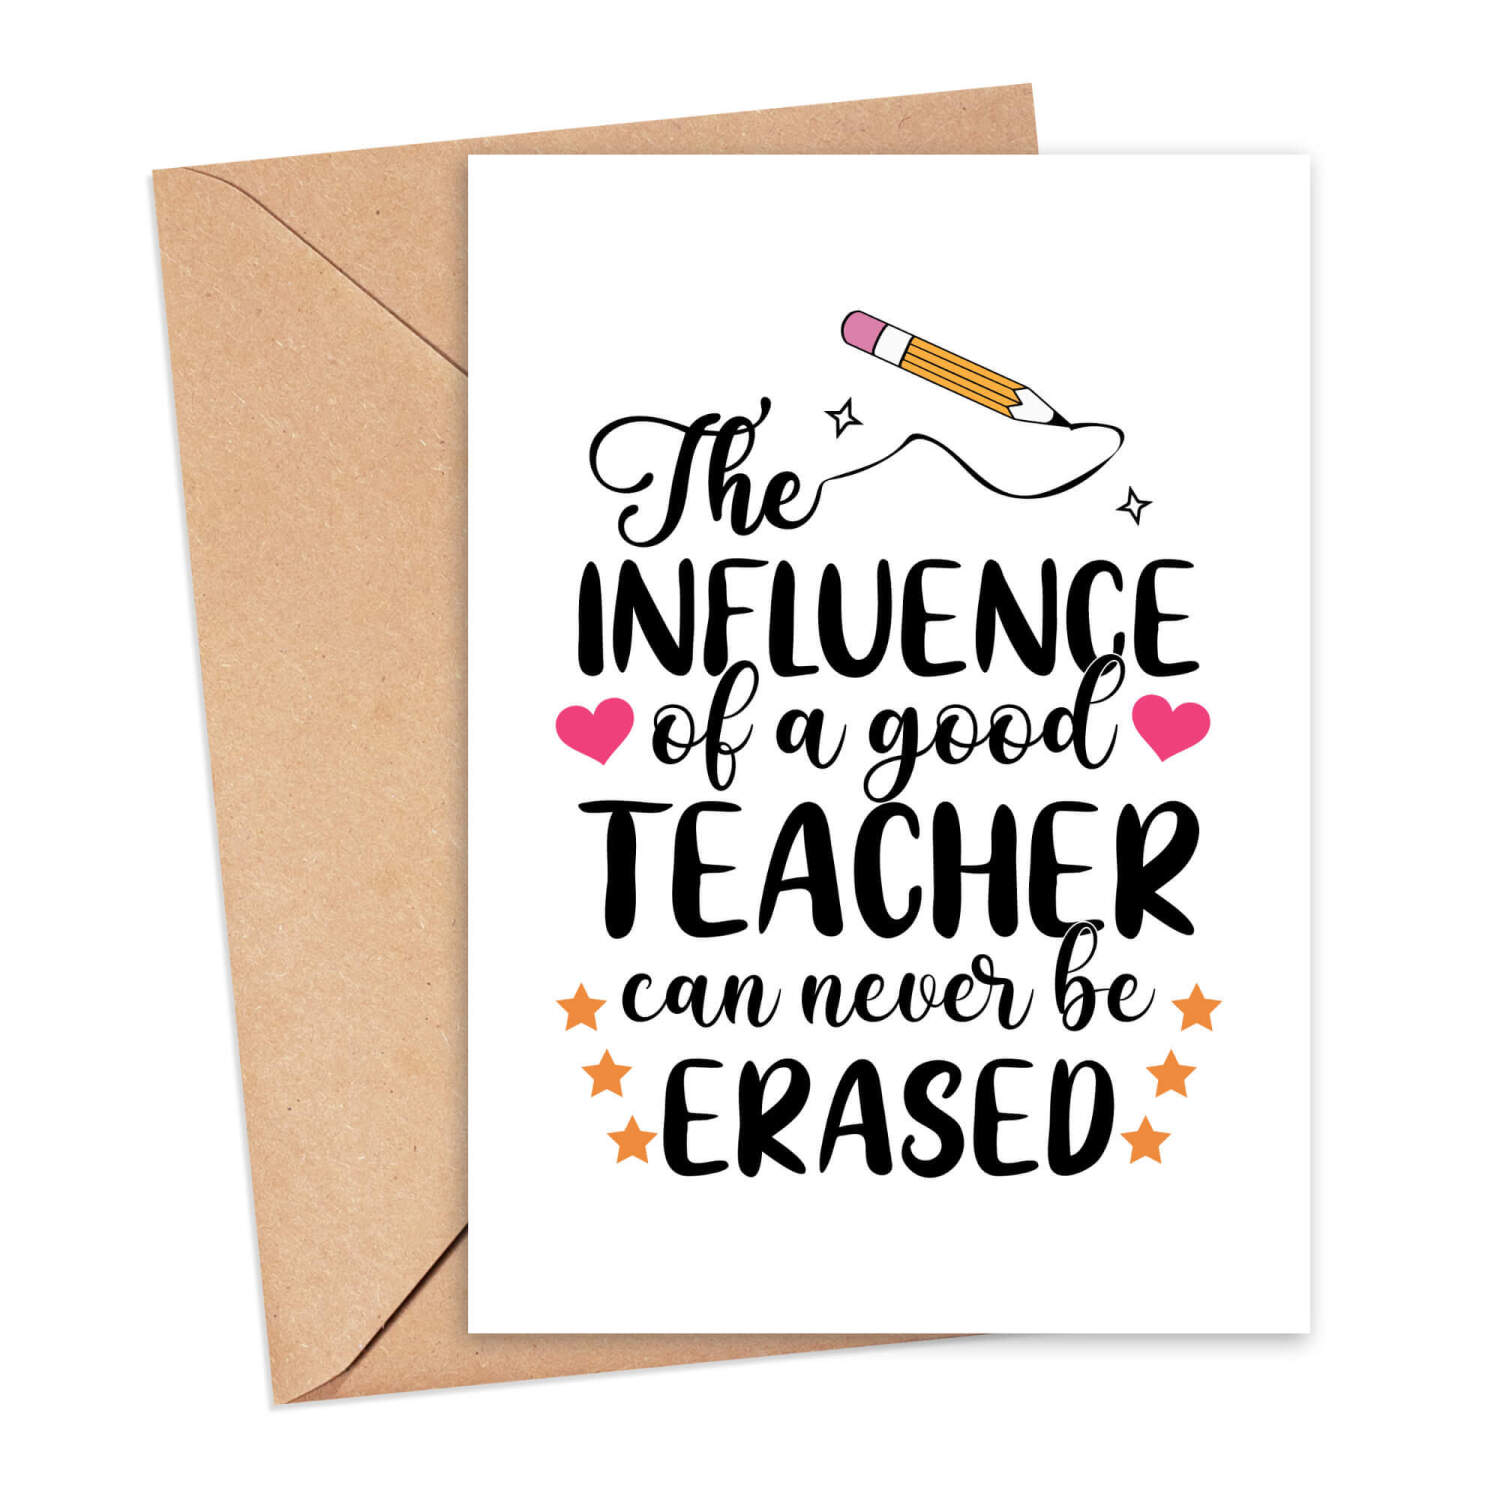 Thank You Teacher Card - The Influence of a Good Teacher Can Never Be Erased - Small - Approx. A6 | 105mm x 14.8mm | 4.1in x 5.8in